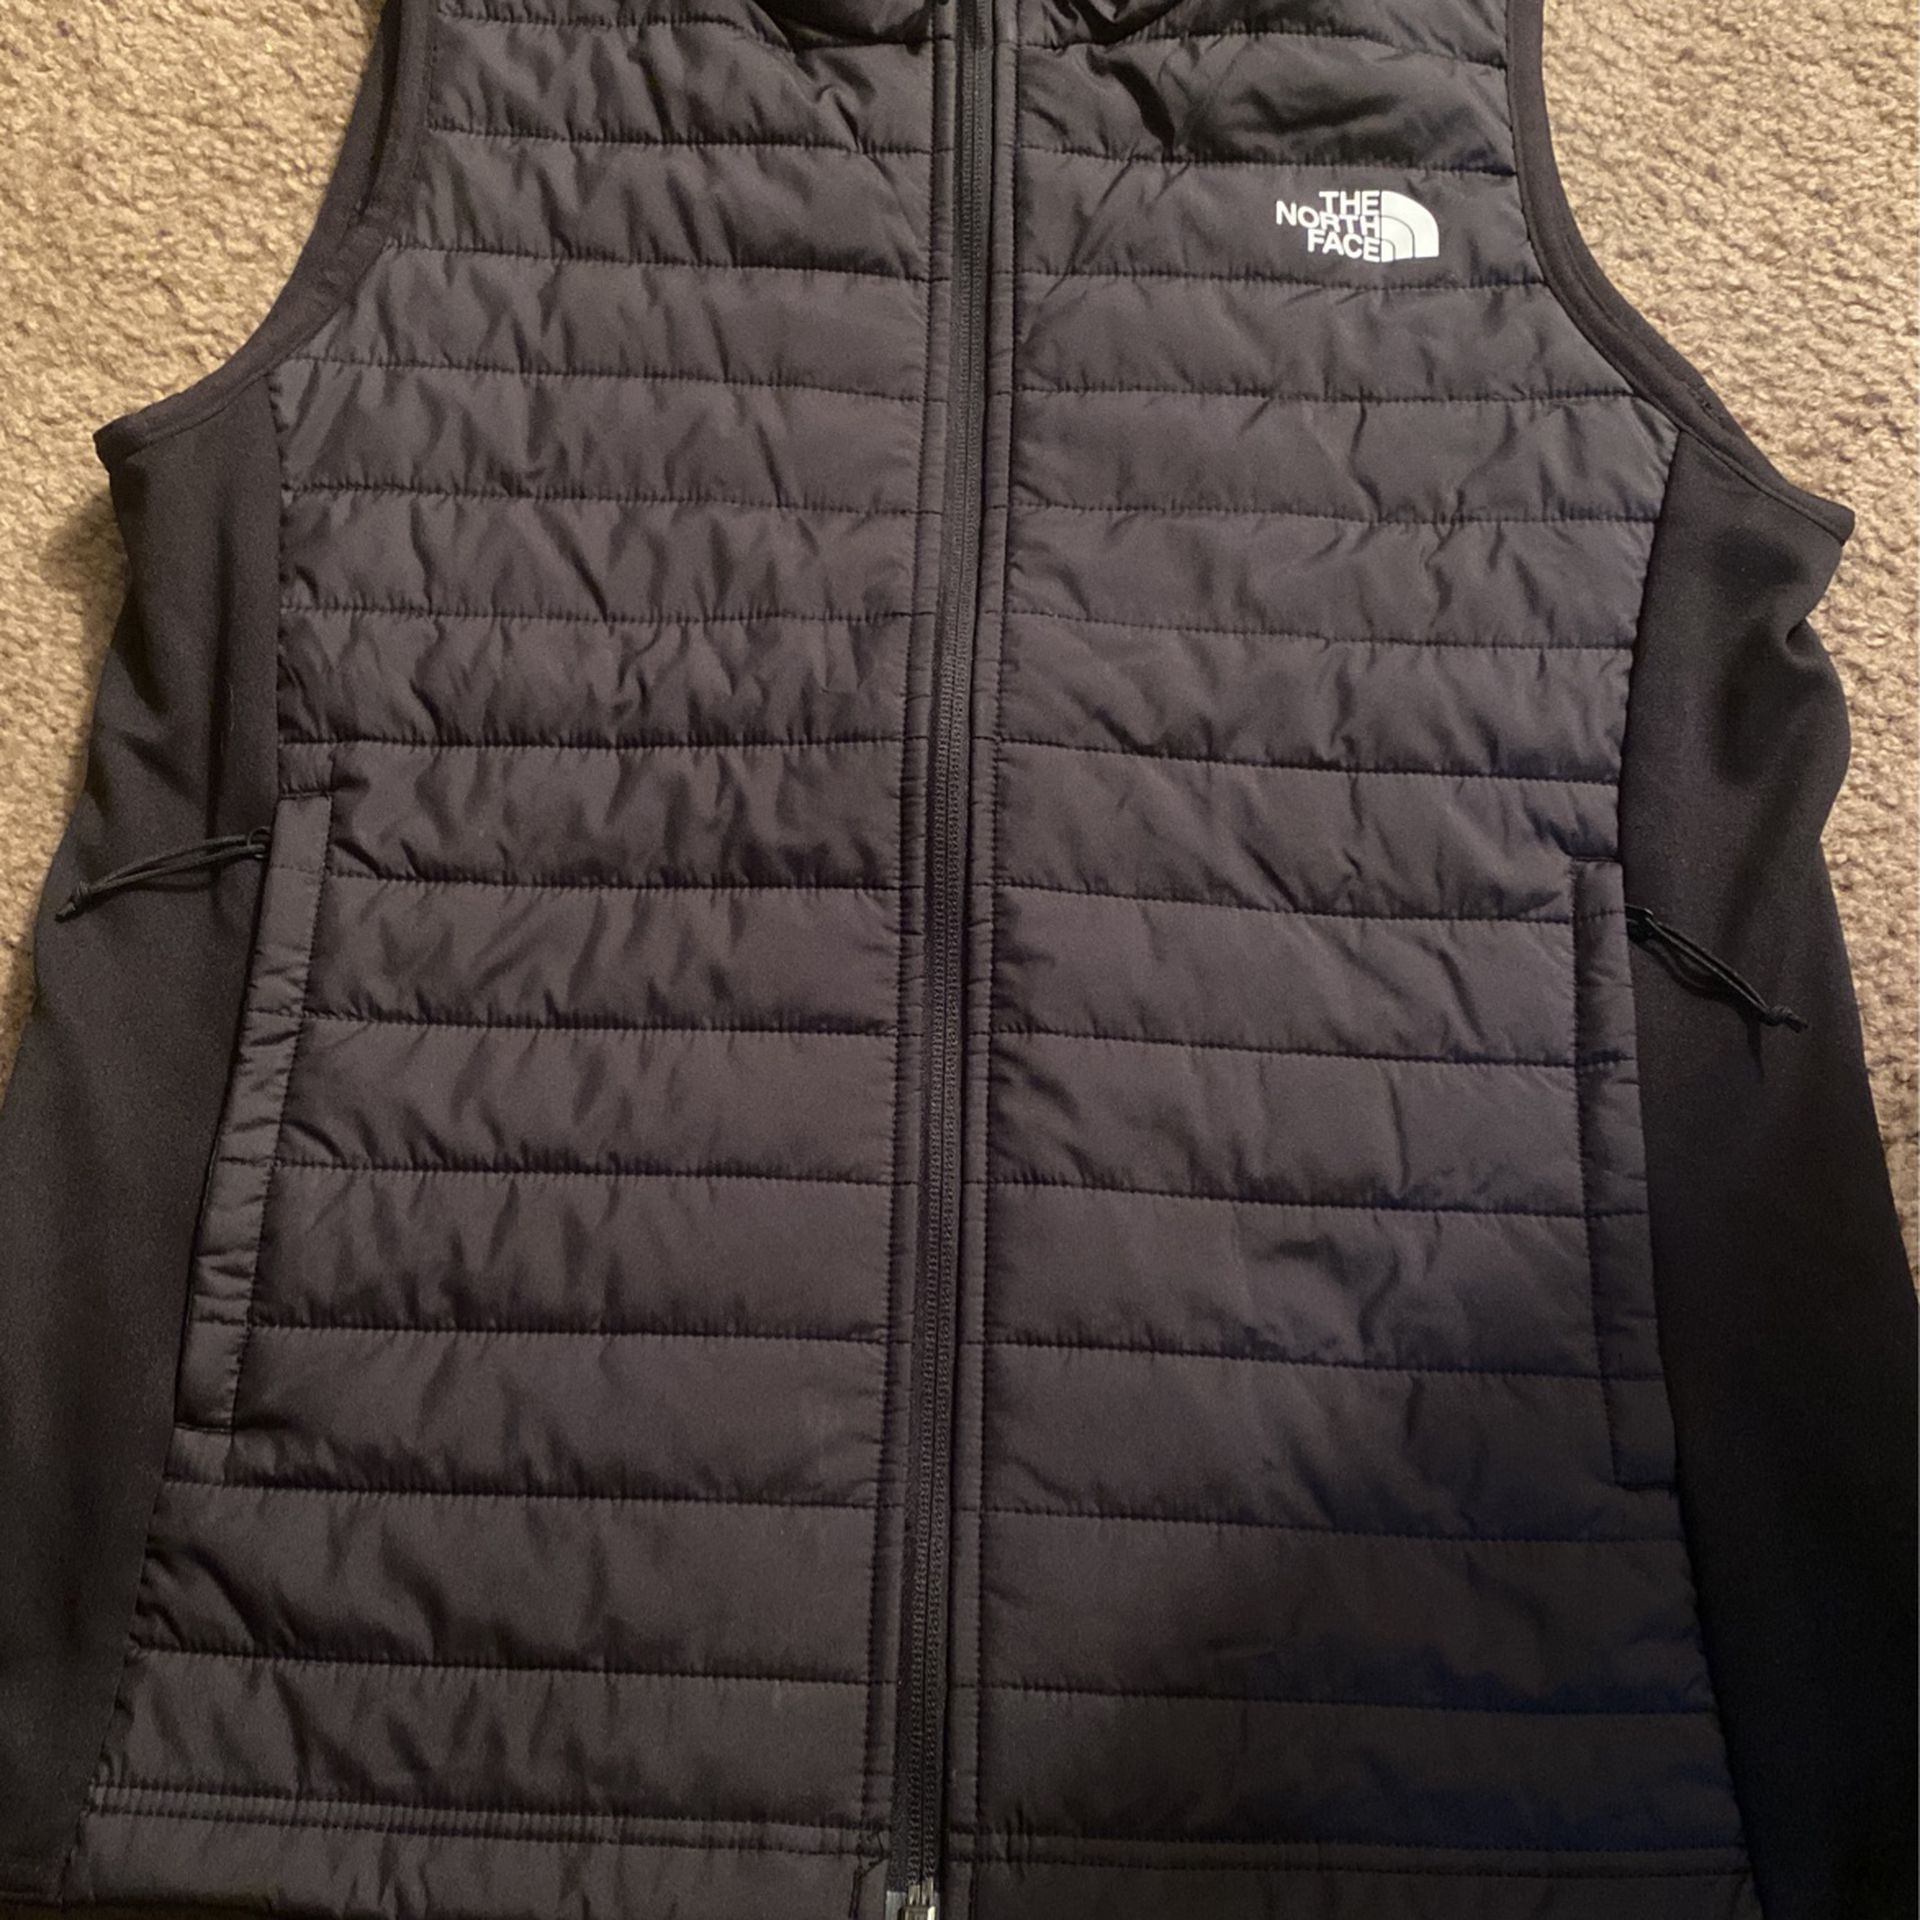 “The North Face” Sweater Vest